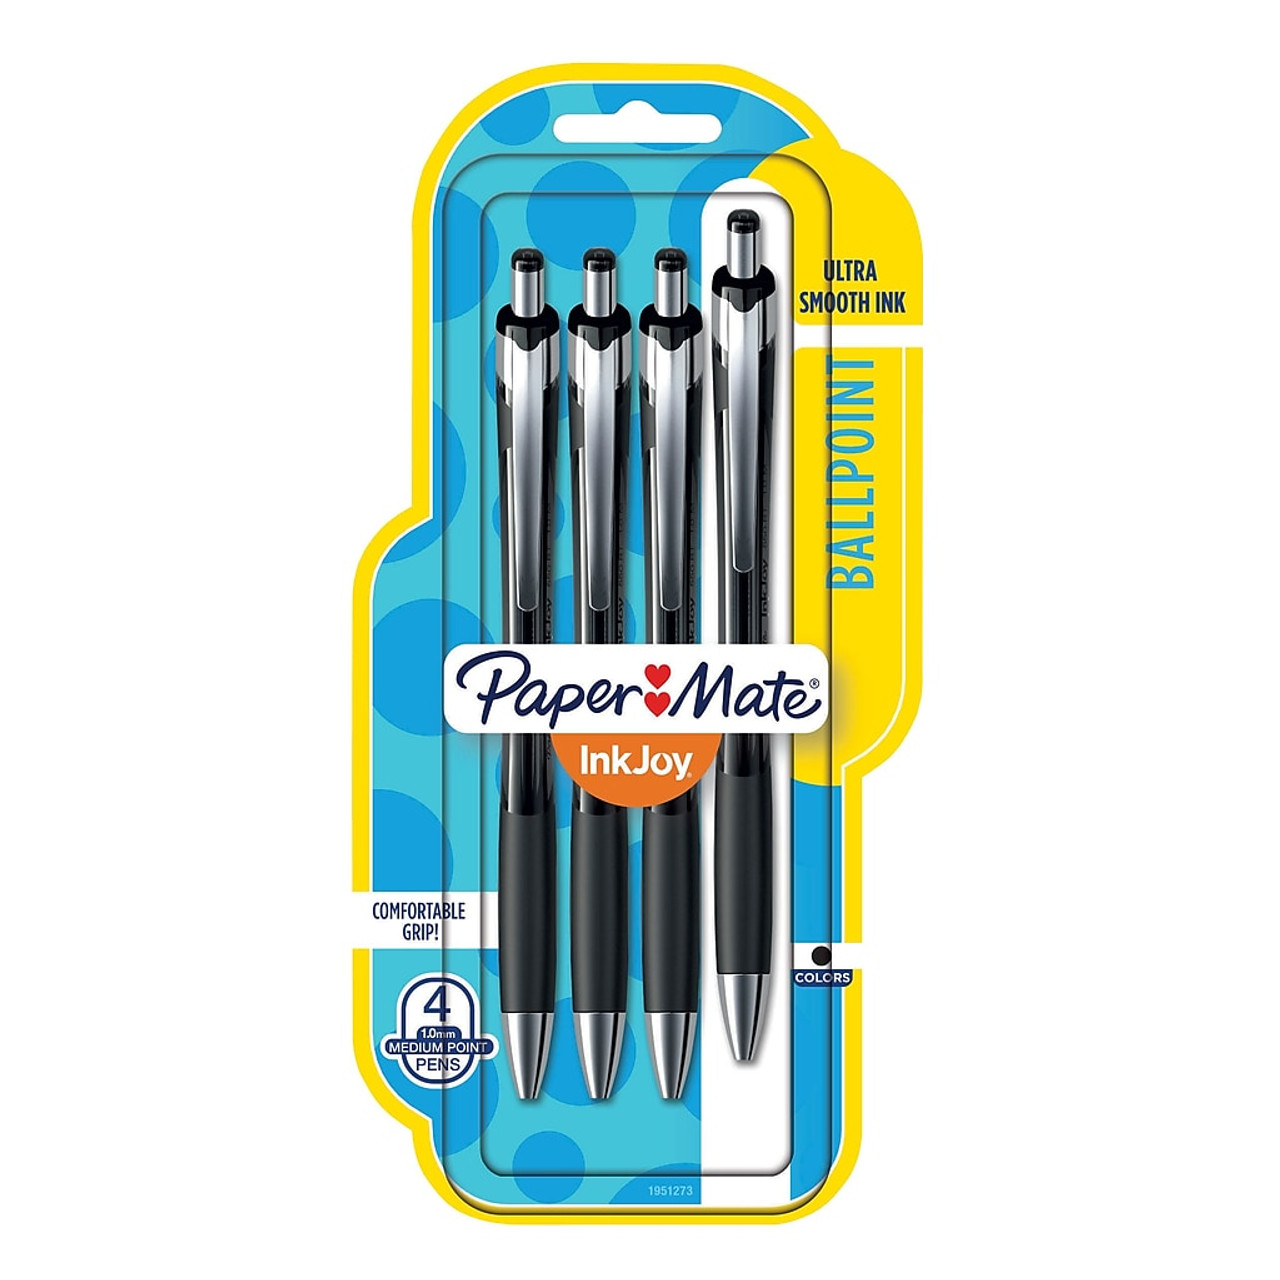 PaperMate Inkjoy 550 RT 1.0M Ballpoint Ultra Smooth